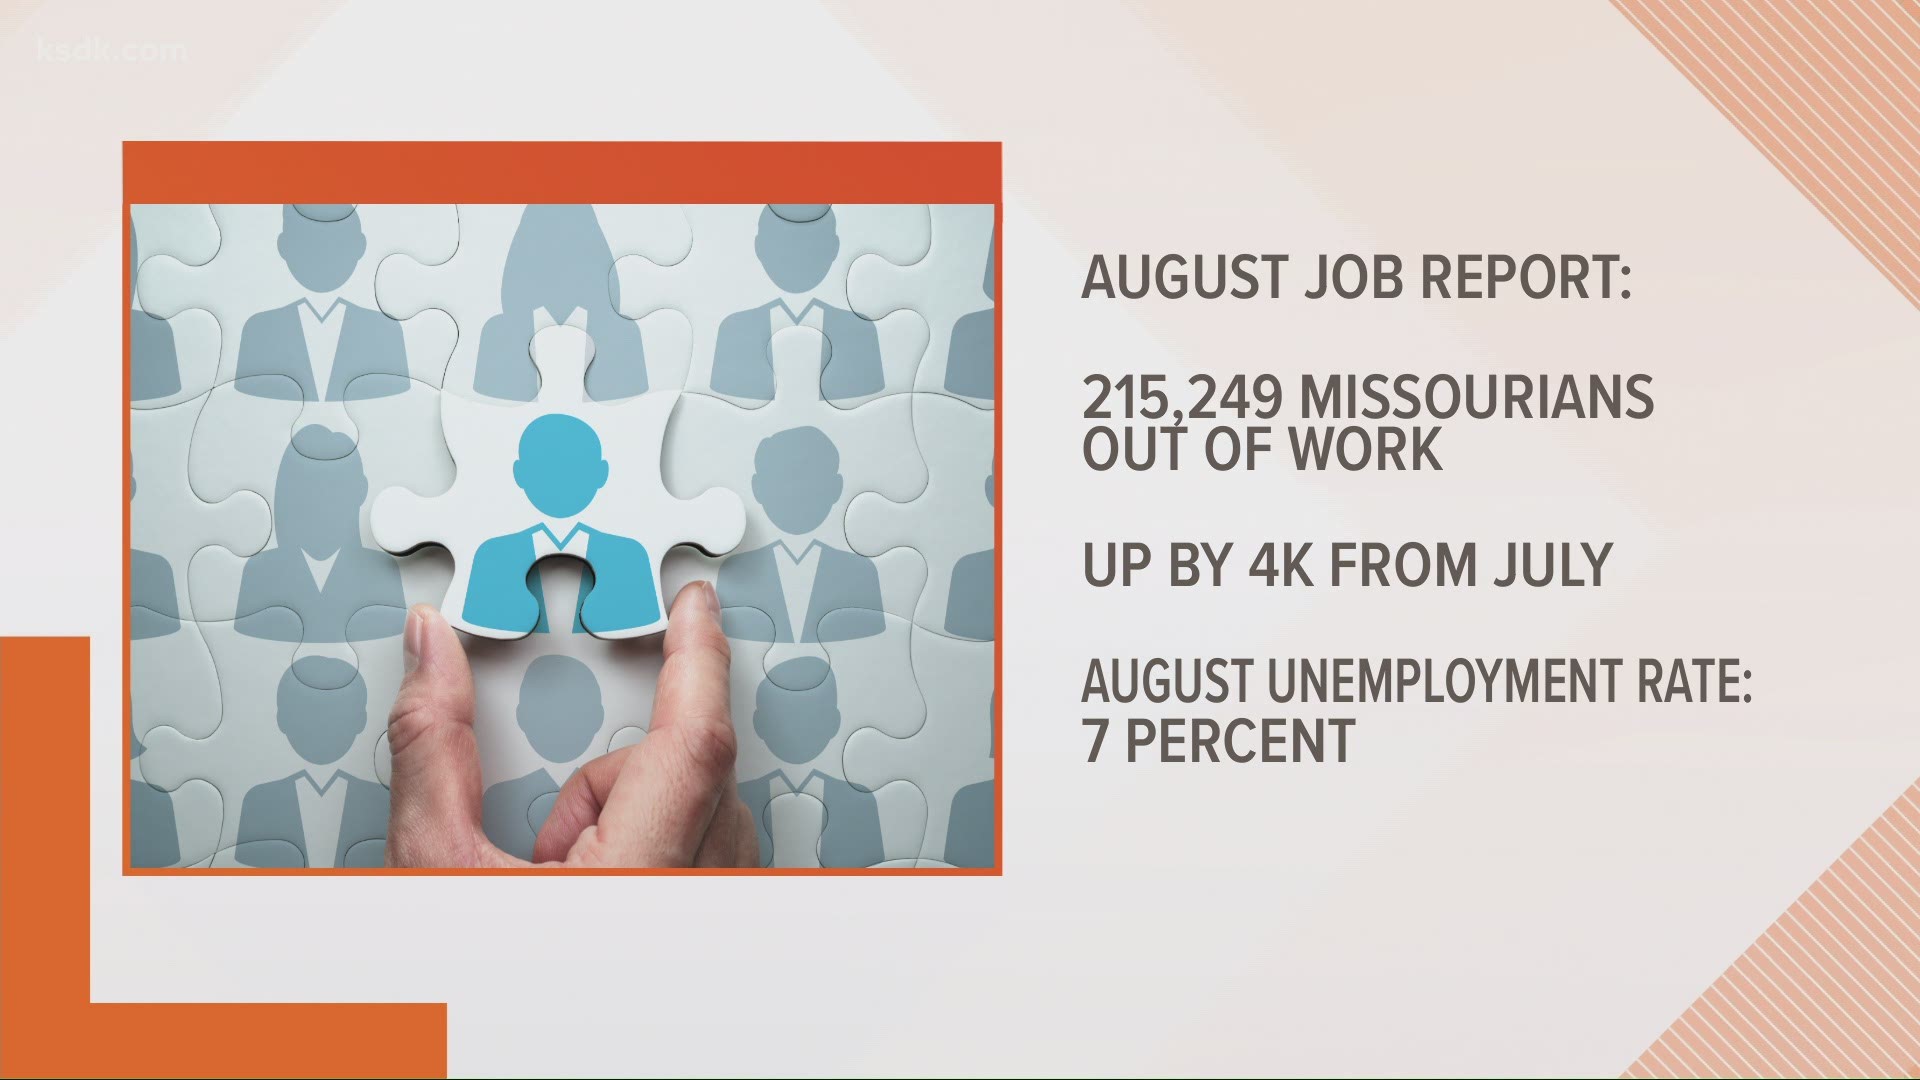 A week ago, 884,000 filed jobless claims for the first time, but Kristen Mulvaney thinks that number is misleading.